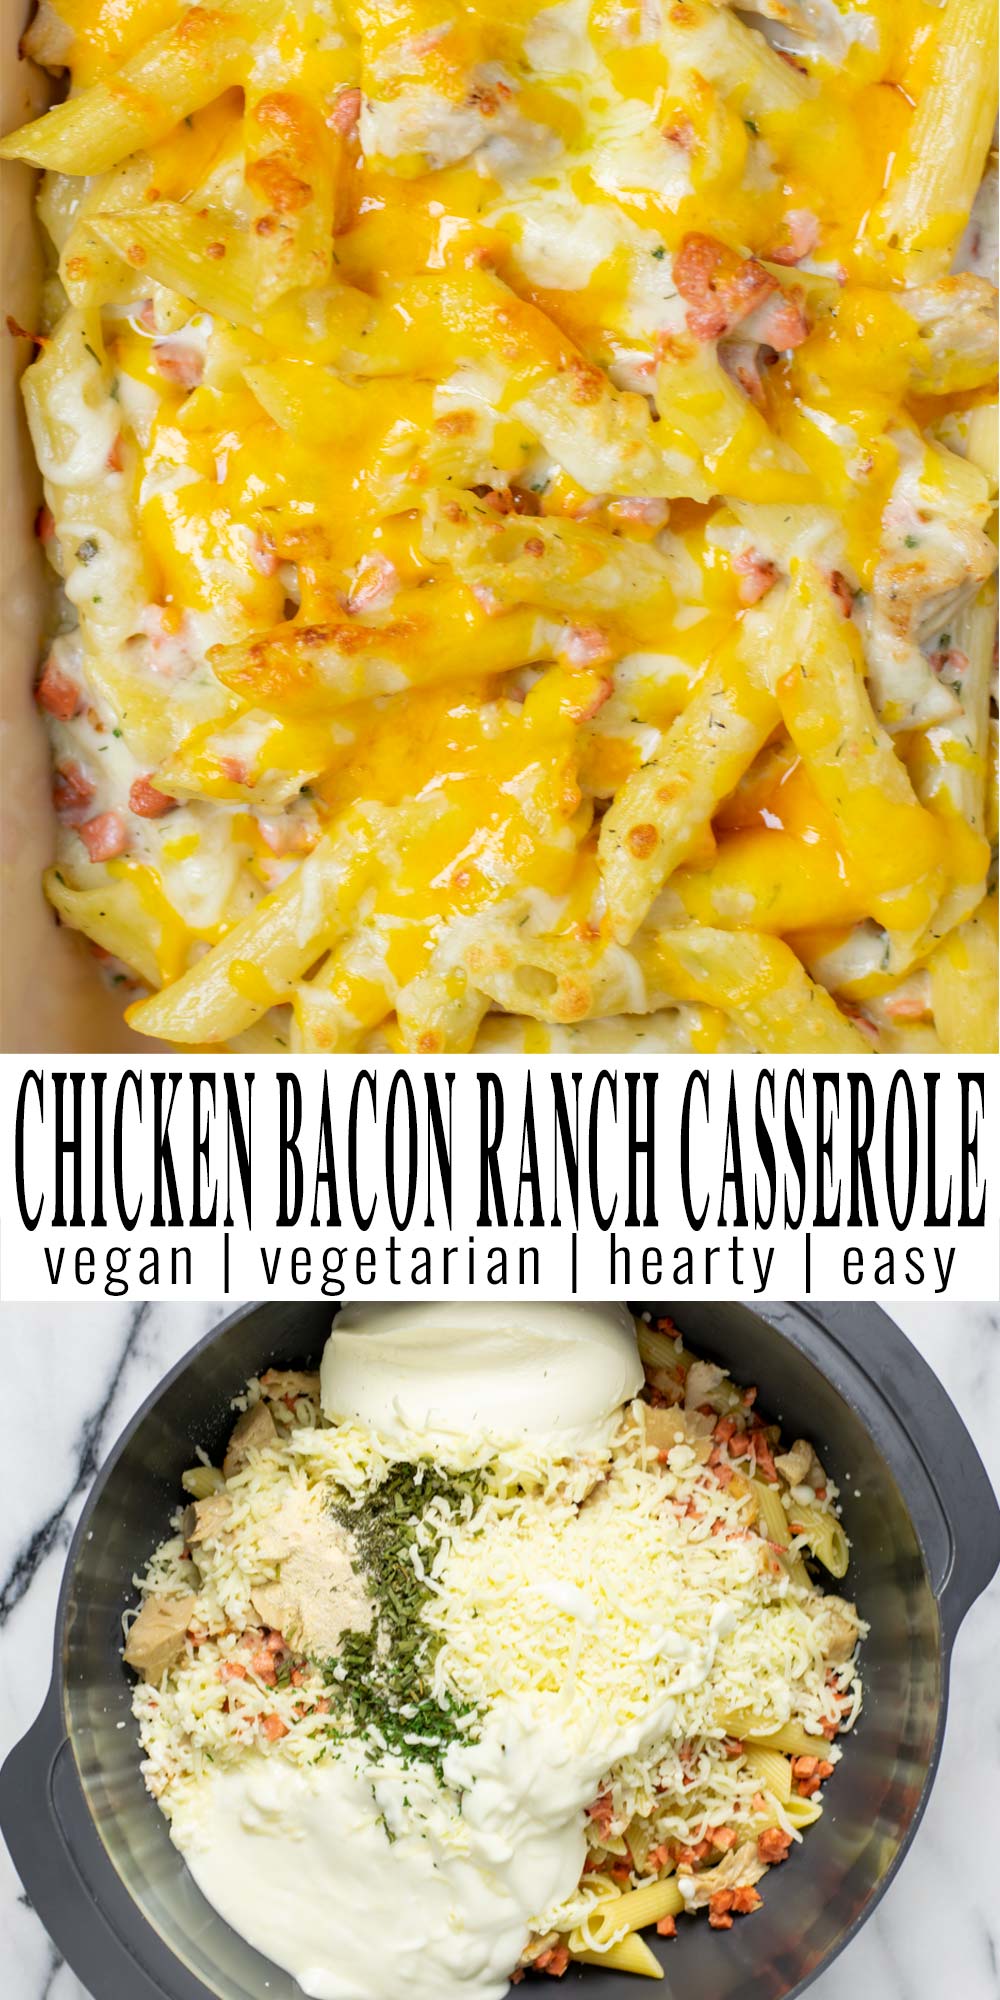 Collage of two pictures of the Chicken Bacon Ranch Casserole with recipe title text.